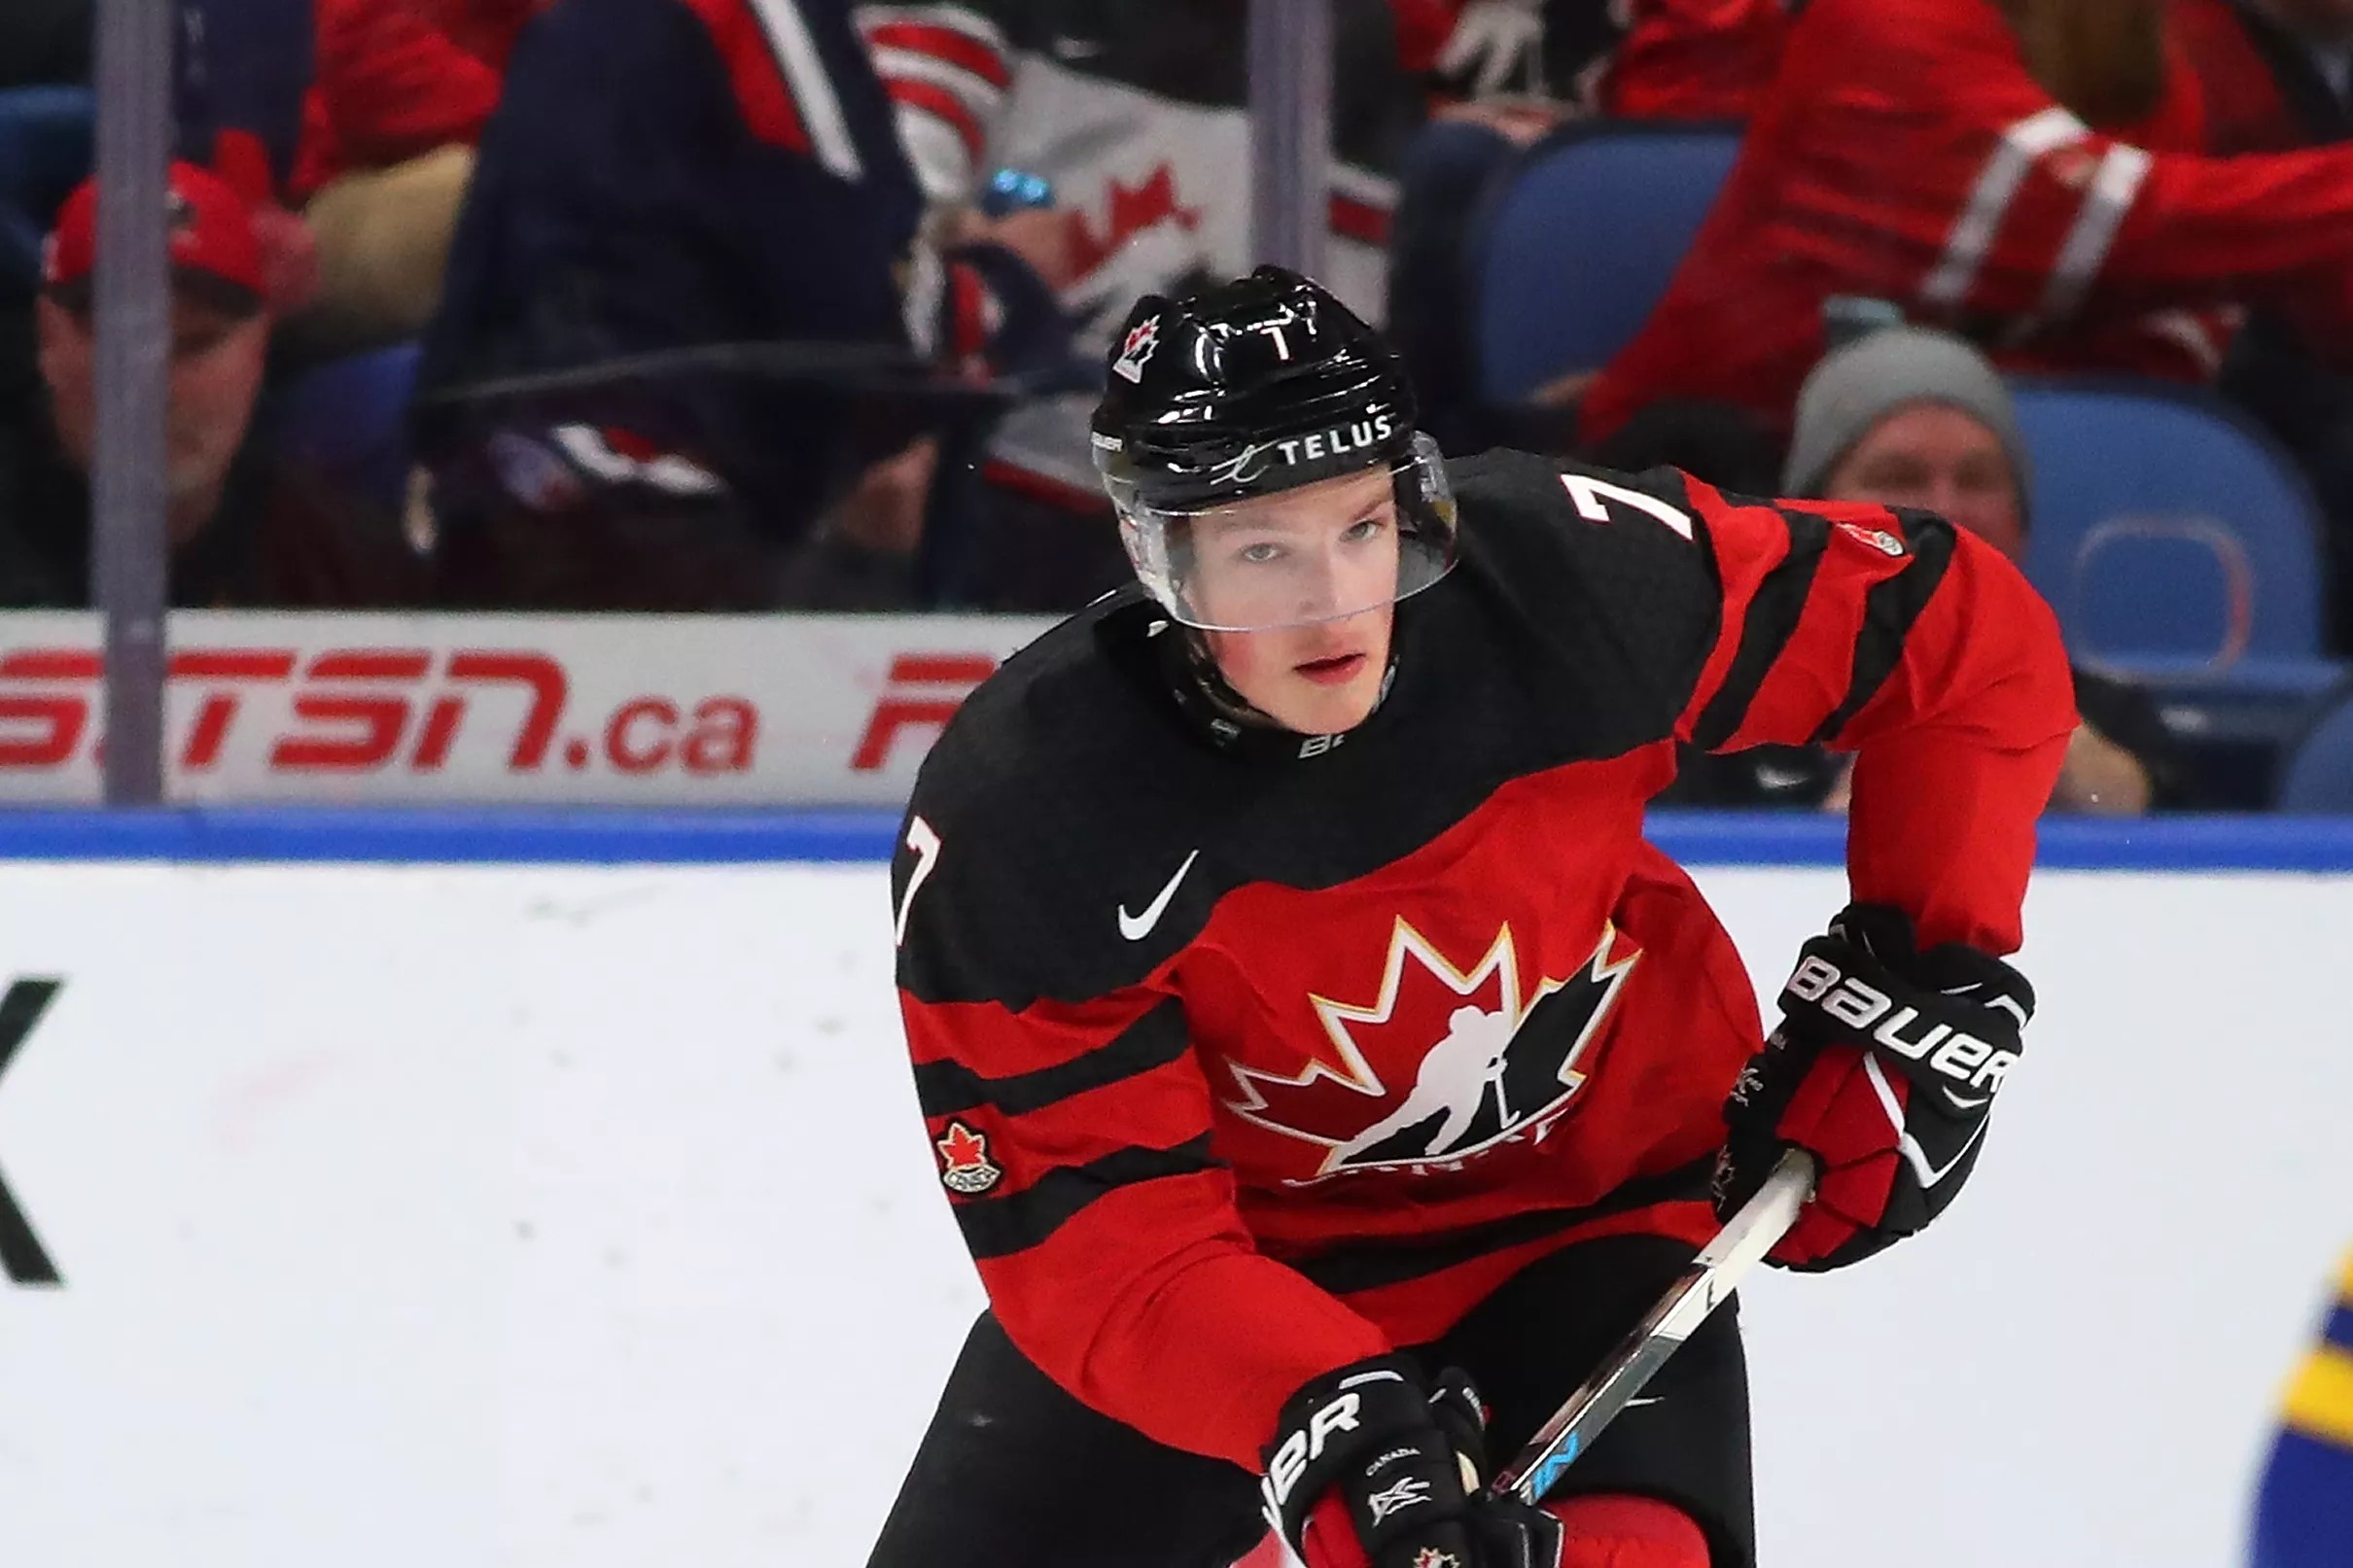 Cale Makar has passed on playing in the Olympics for Canada